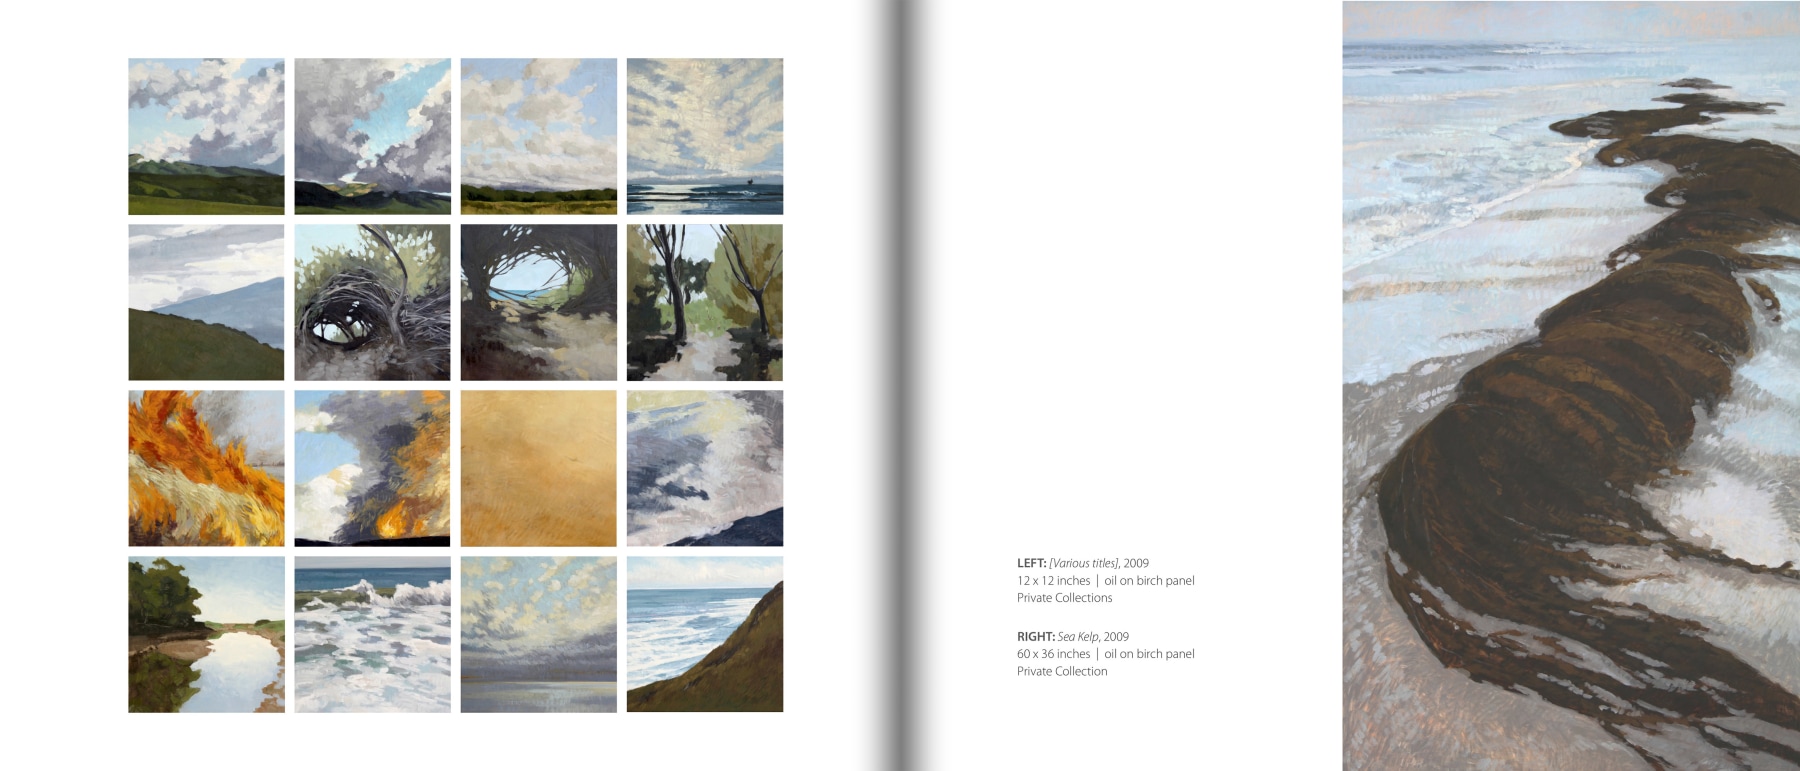 Internal pages from NICOLE STRASBURG: 50/50 with grid of 12 x 12 inch painting and image of &quot;Sea Kelp&quot;, 2009